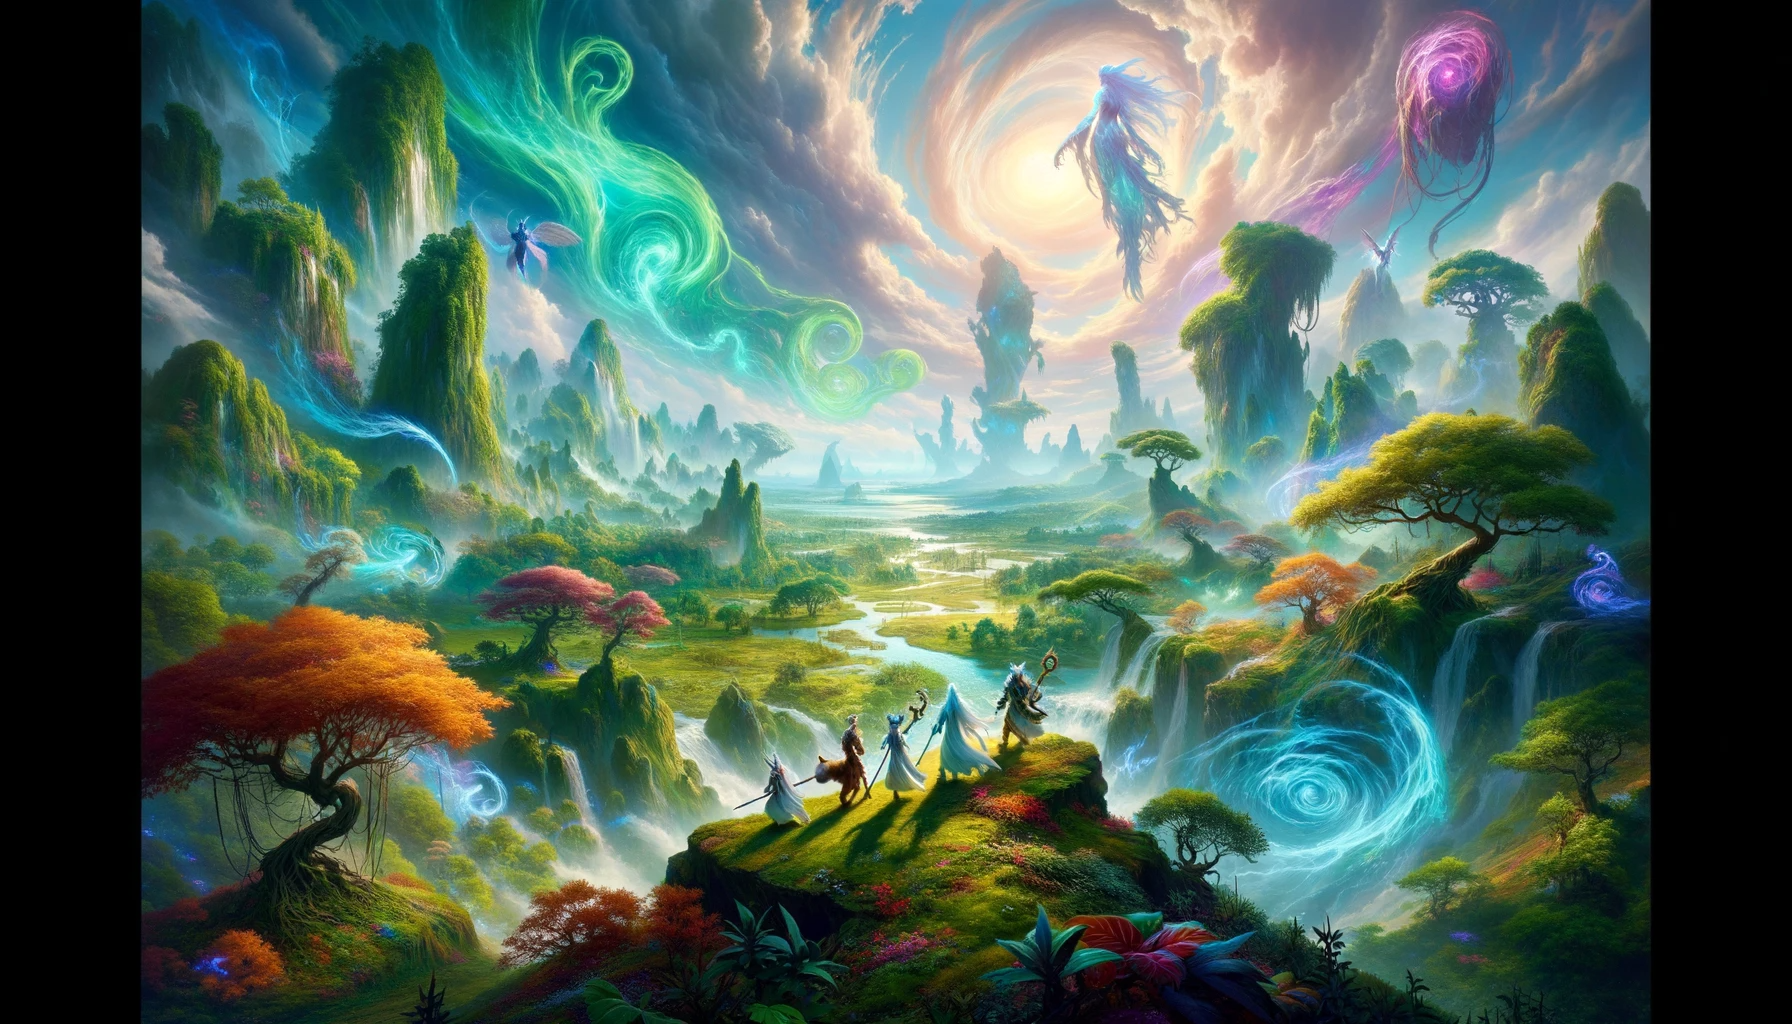 The vibrant and lush landscape of the Waking Shores, showing the Avengers navigating the terrain.